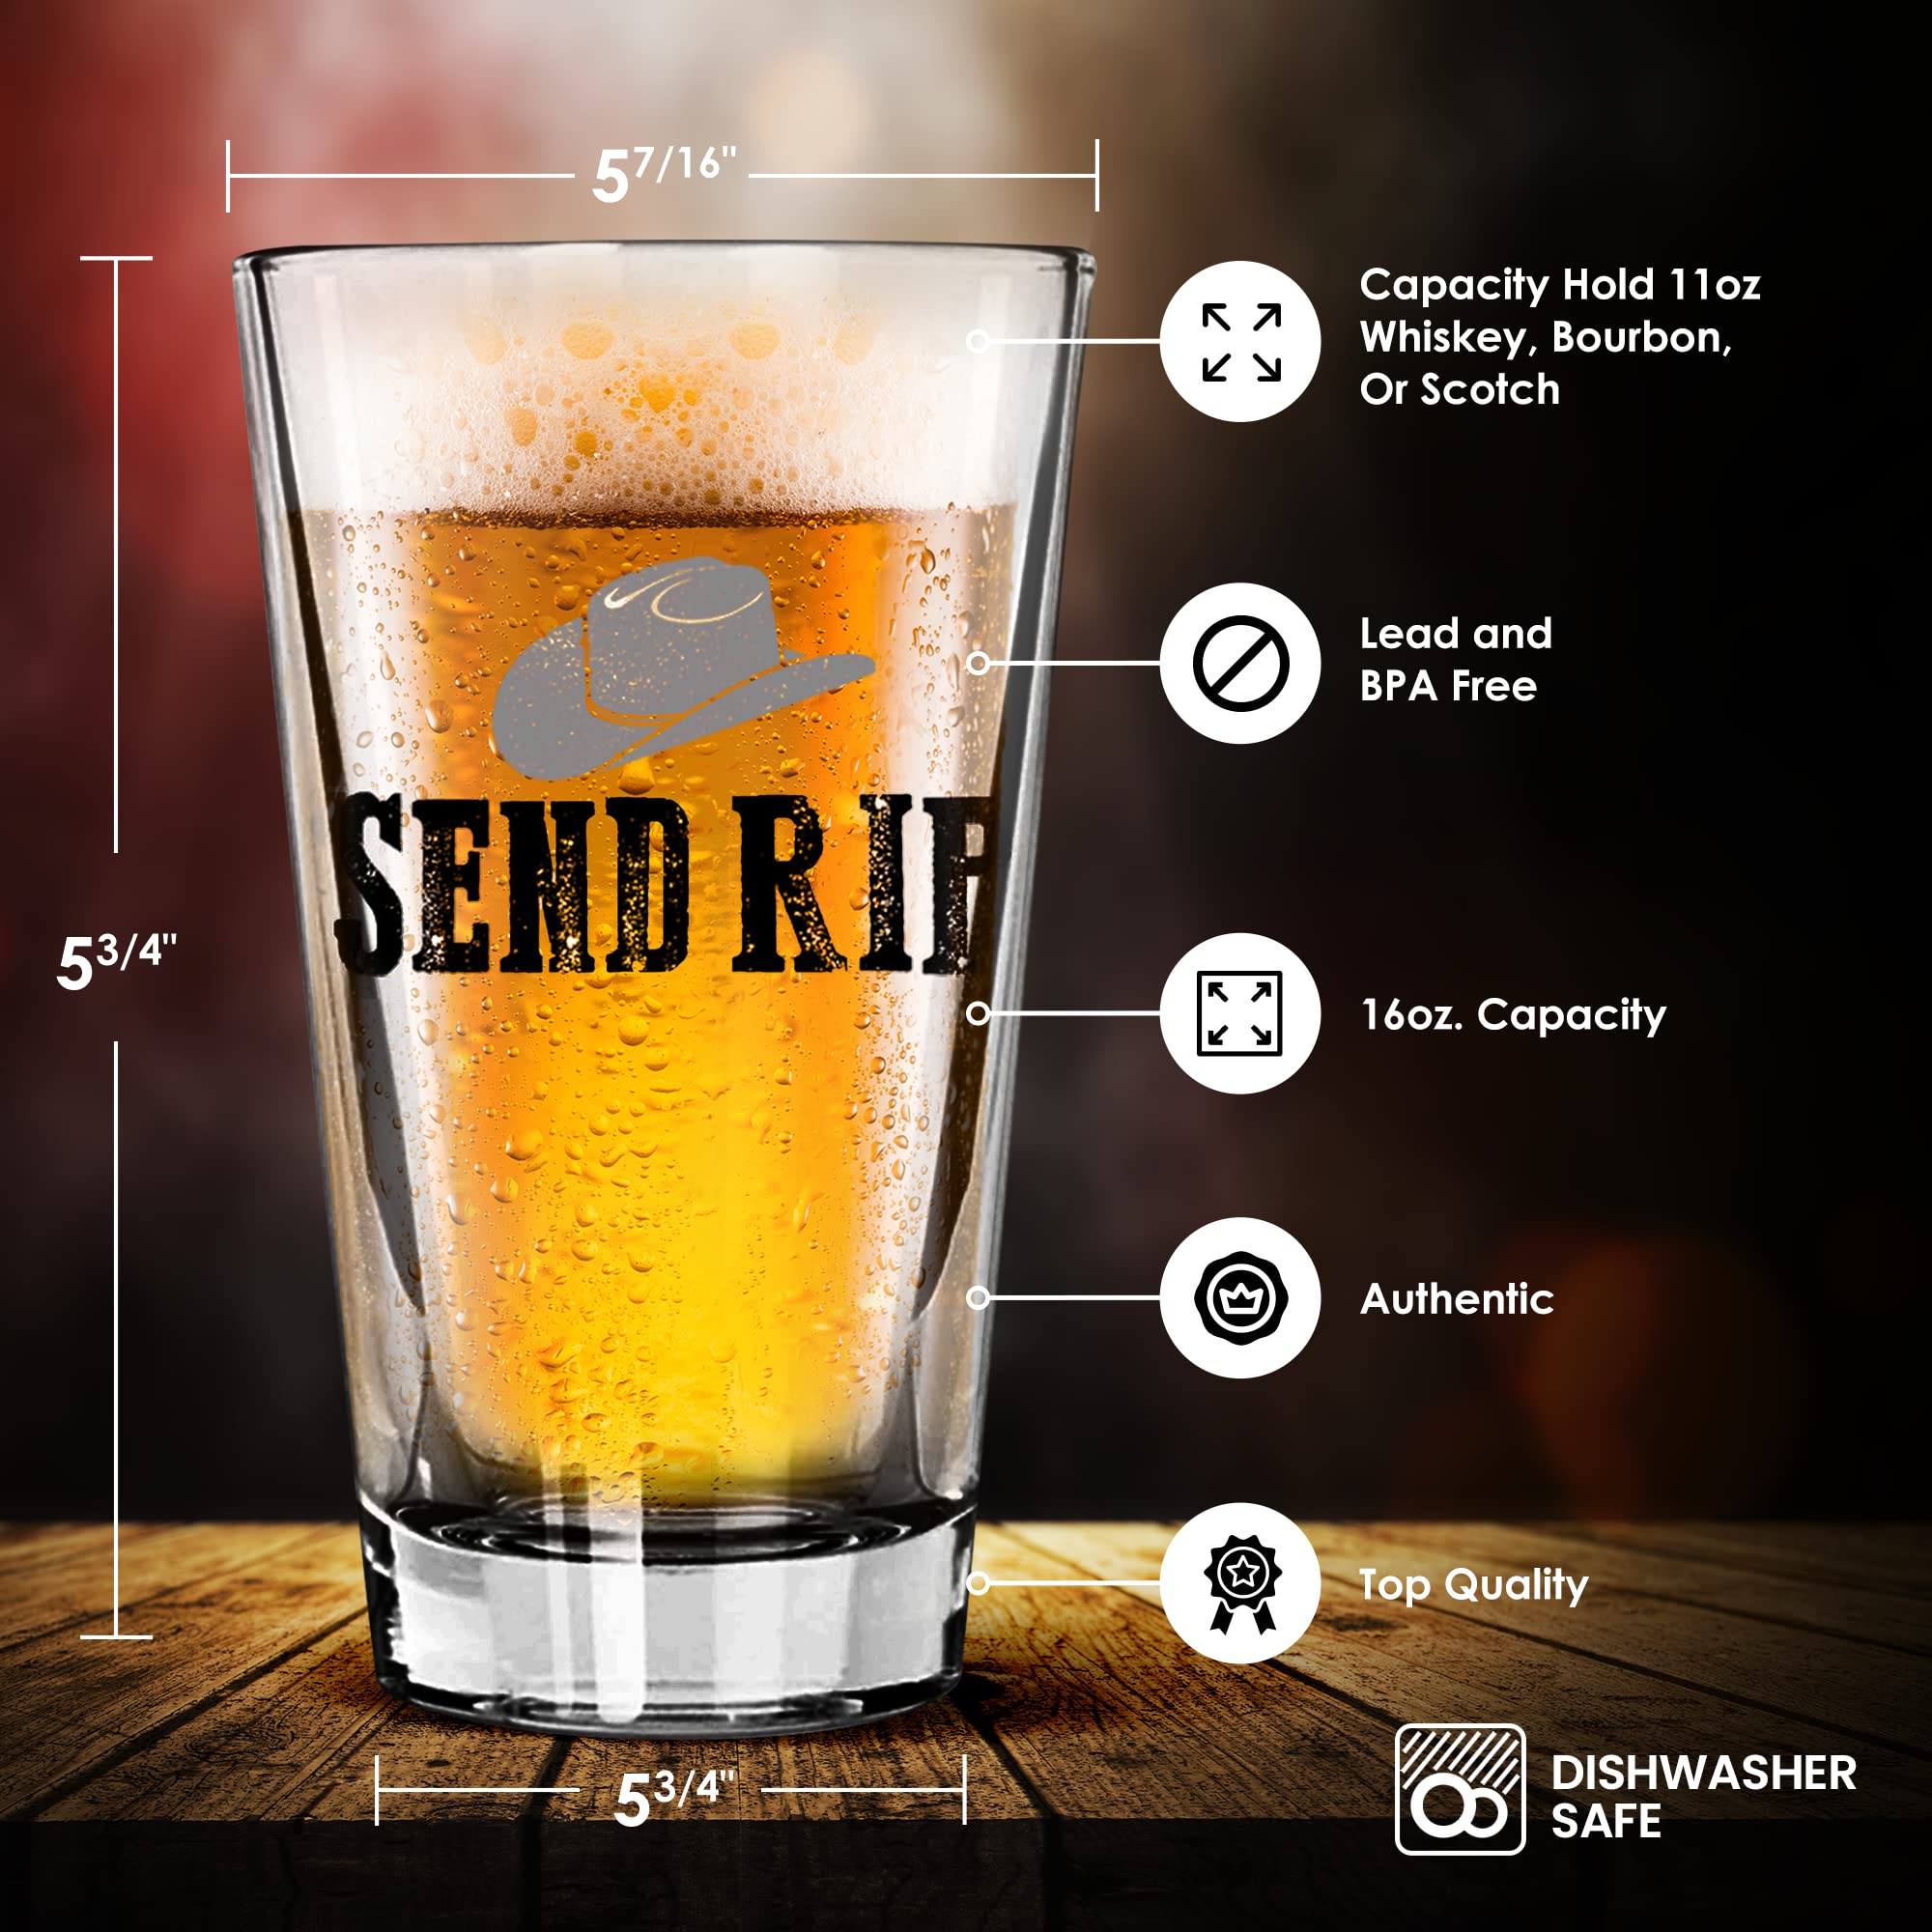 Toasted Tales Send RIP | Classic Beer Pint Glass 16 oz. | Highball Cocktail Mixing Class | Bar Quality Glassware | Perfect Glass Beer Steins for Cold Beverages